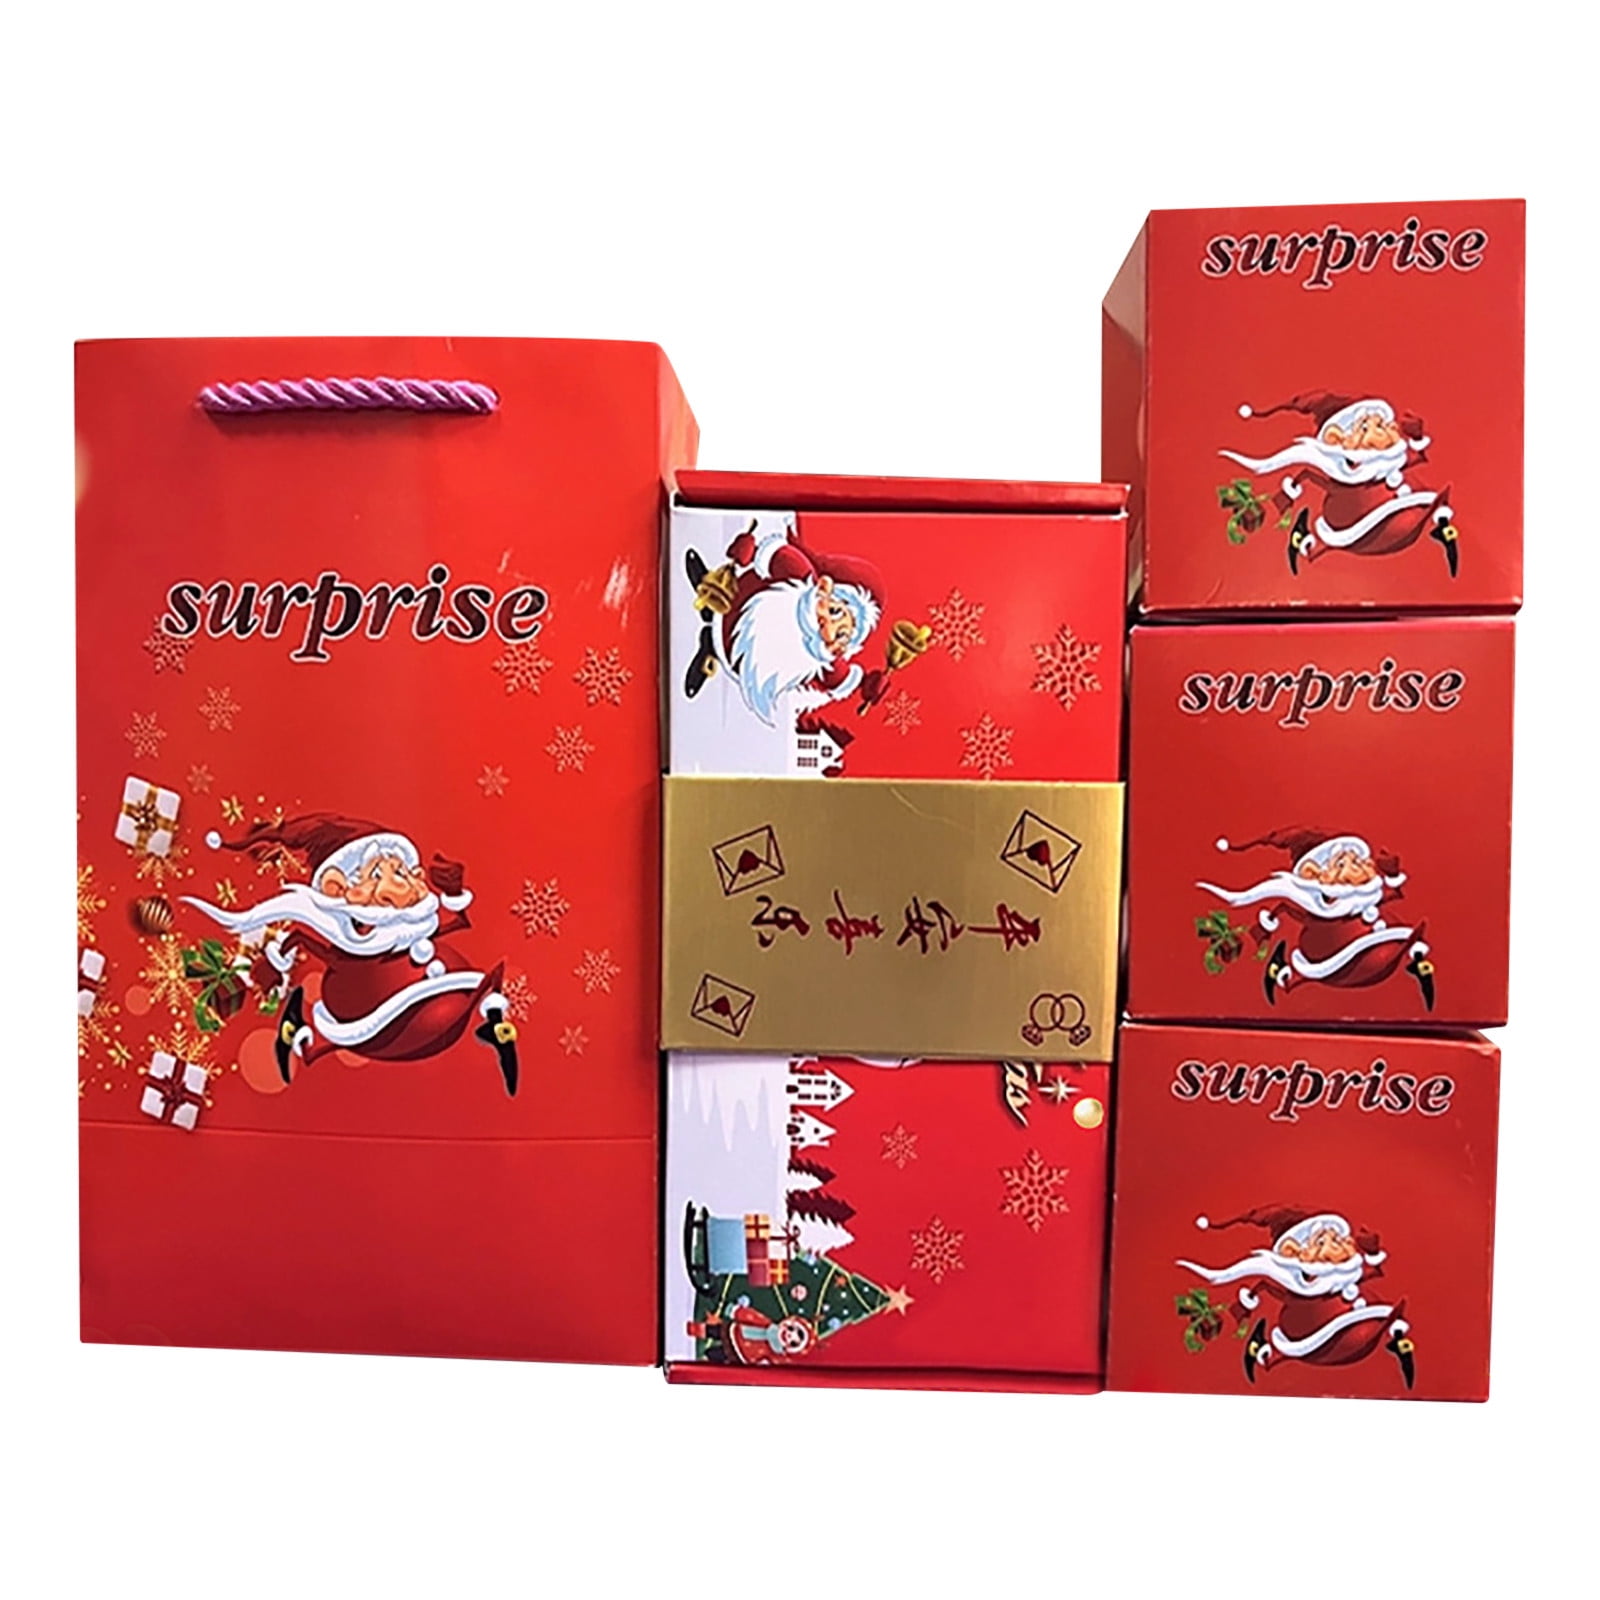 Christmas Holiday Surprise Toy Box – Your Fam Box